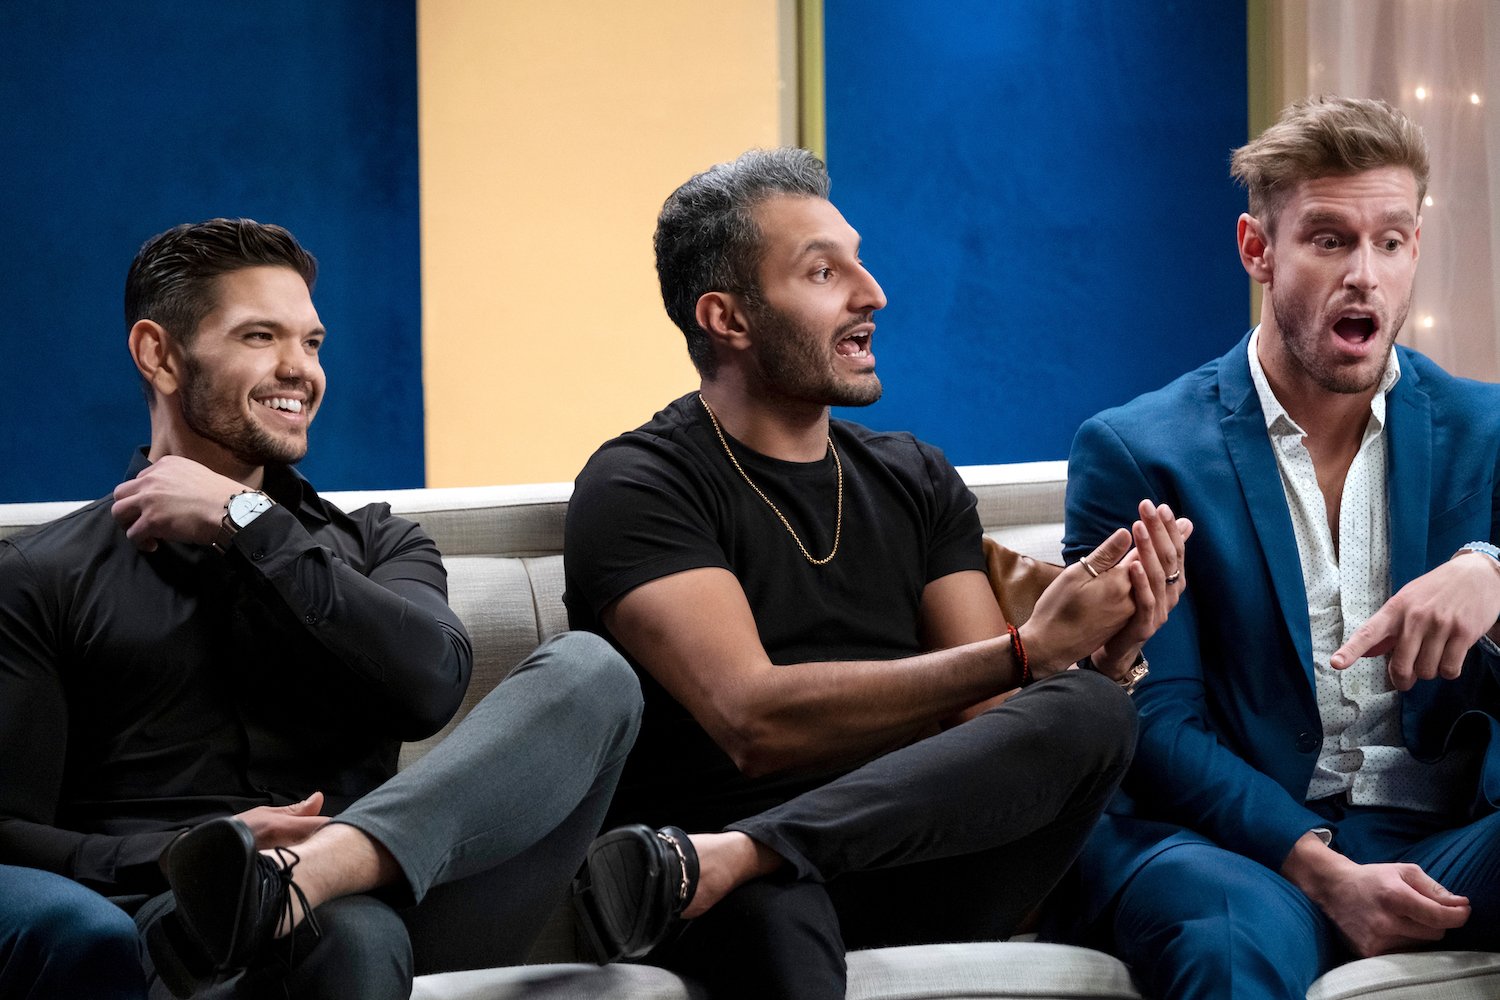 ‘Love Is Blind’ Star Shake Chatterjee Bailed on ‘Perfect Match’ After Learning Nick Lachey Was Host